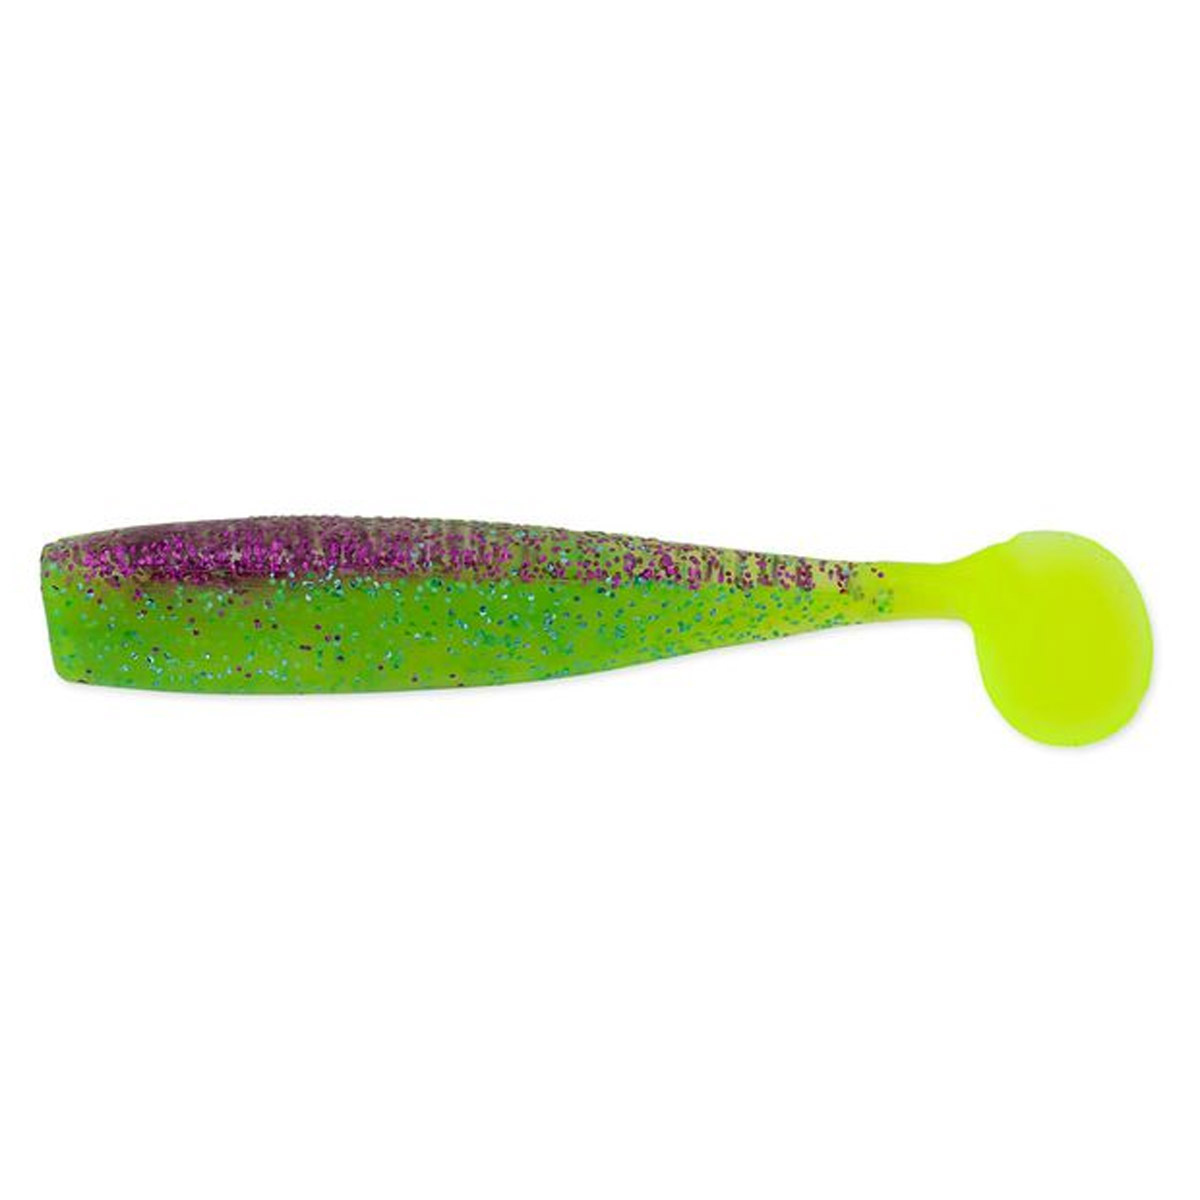 Lunker City Shaker Firetail 3,25 Inch -  Pimp Daddy CT